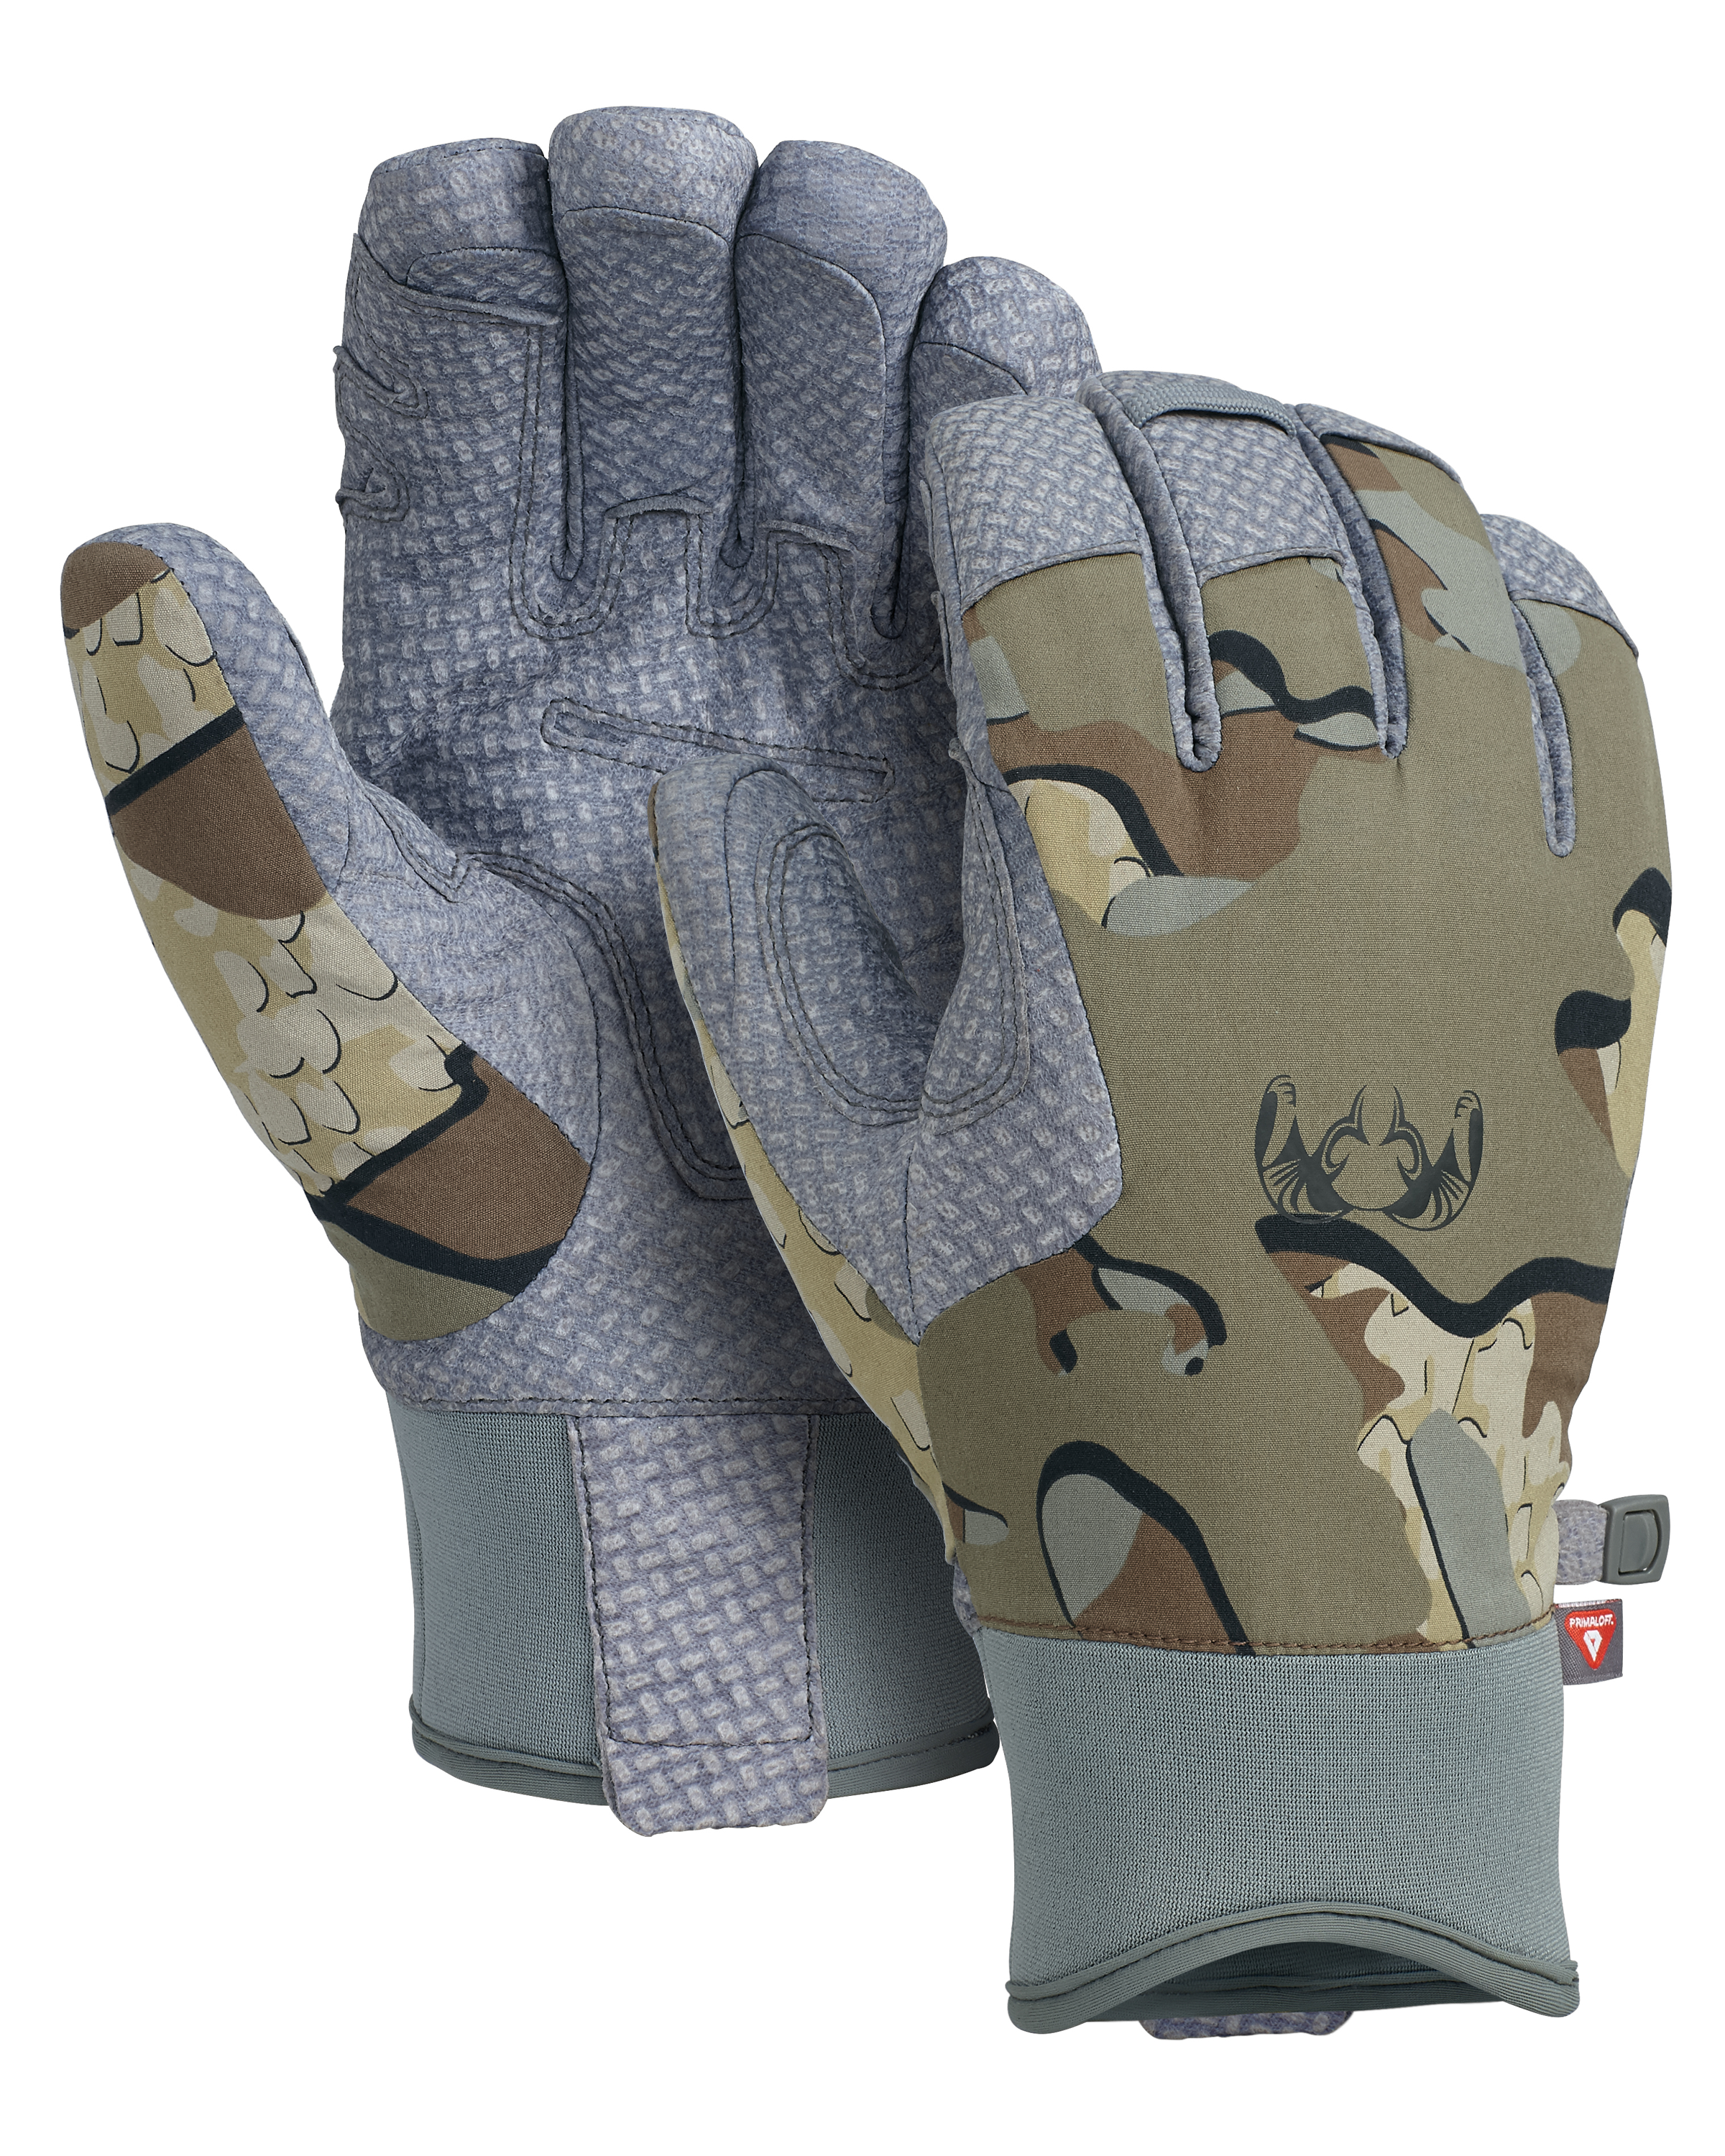 KUIU Expedition Hunting Glove in Valo | Large